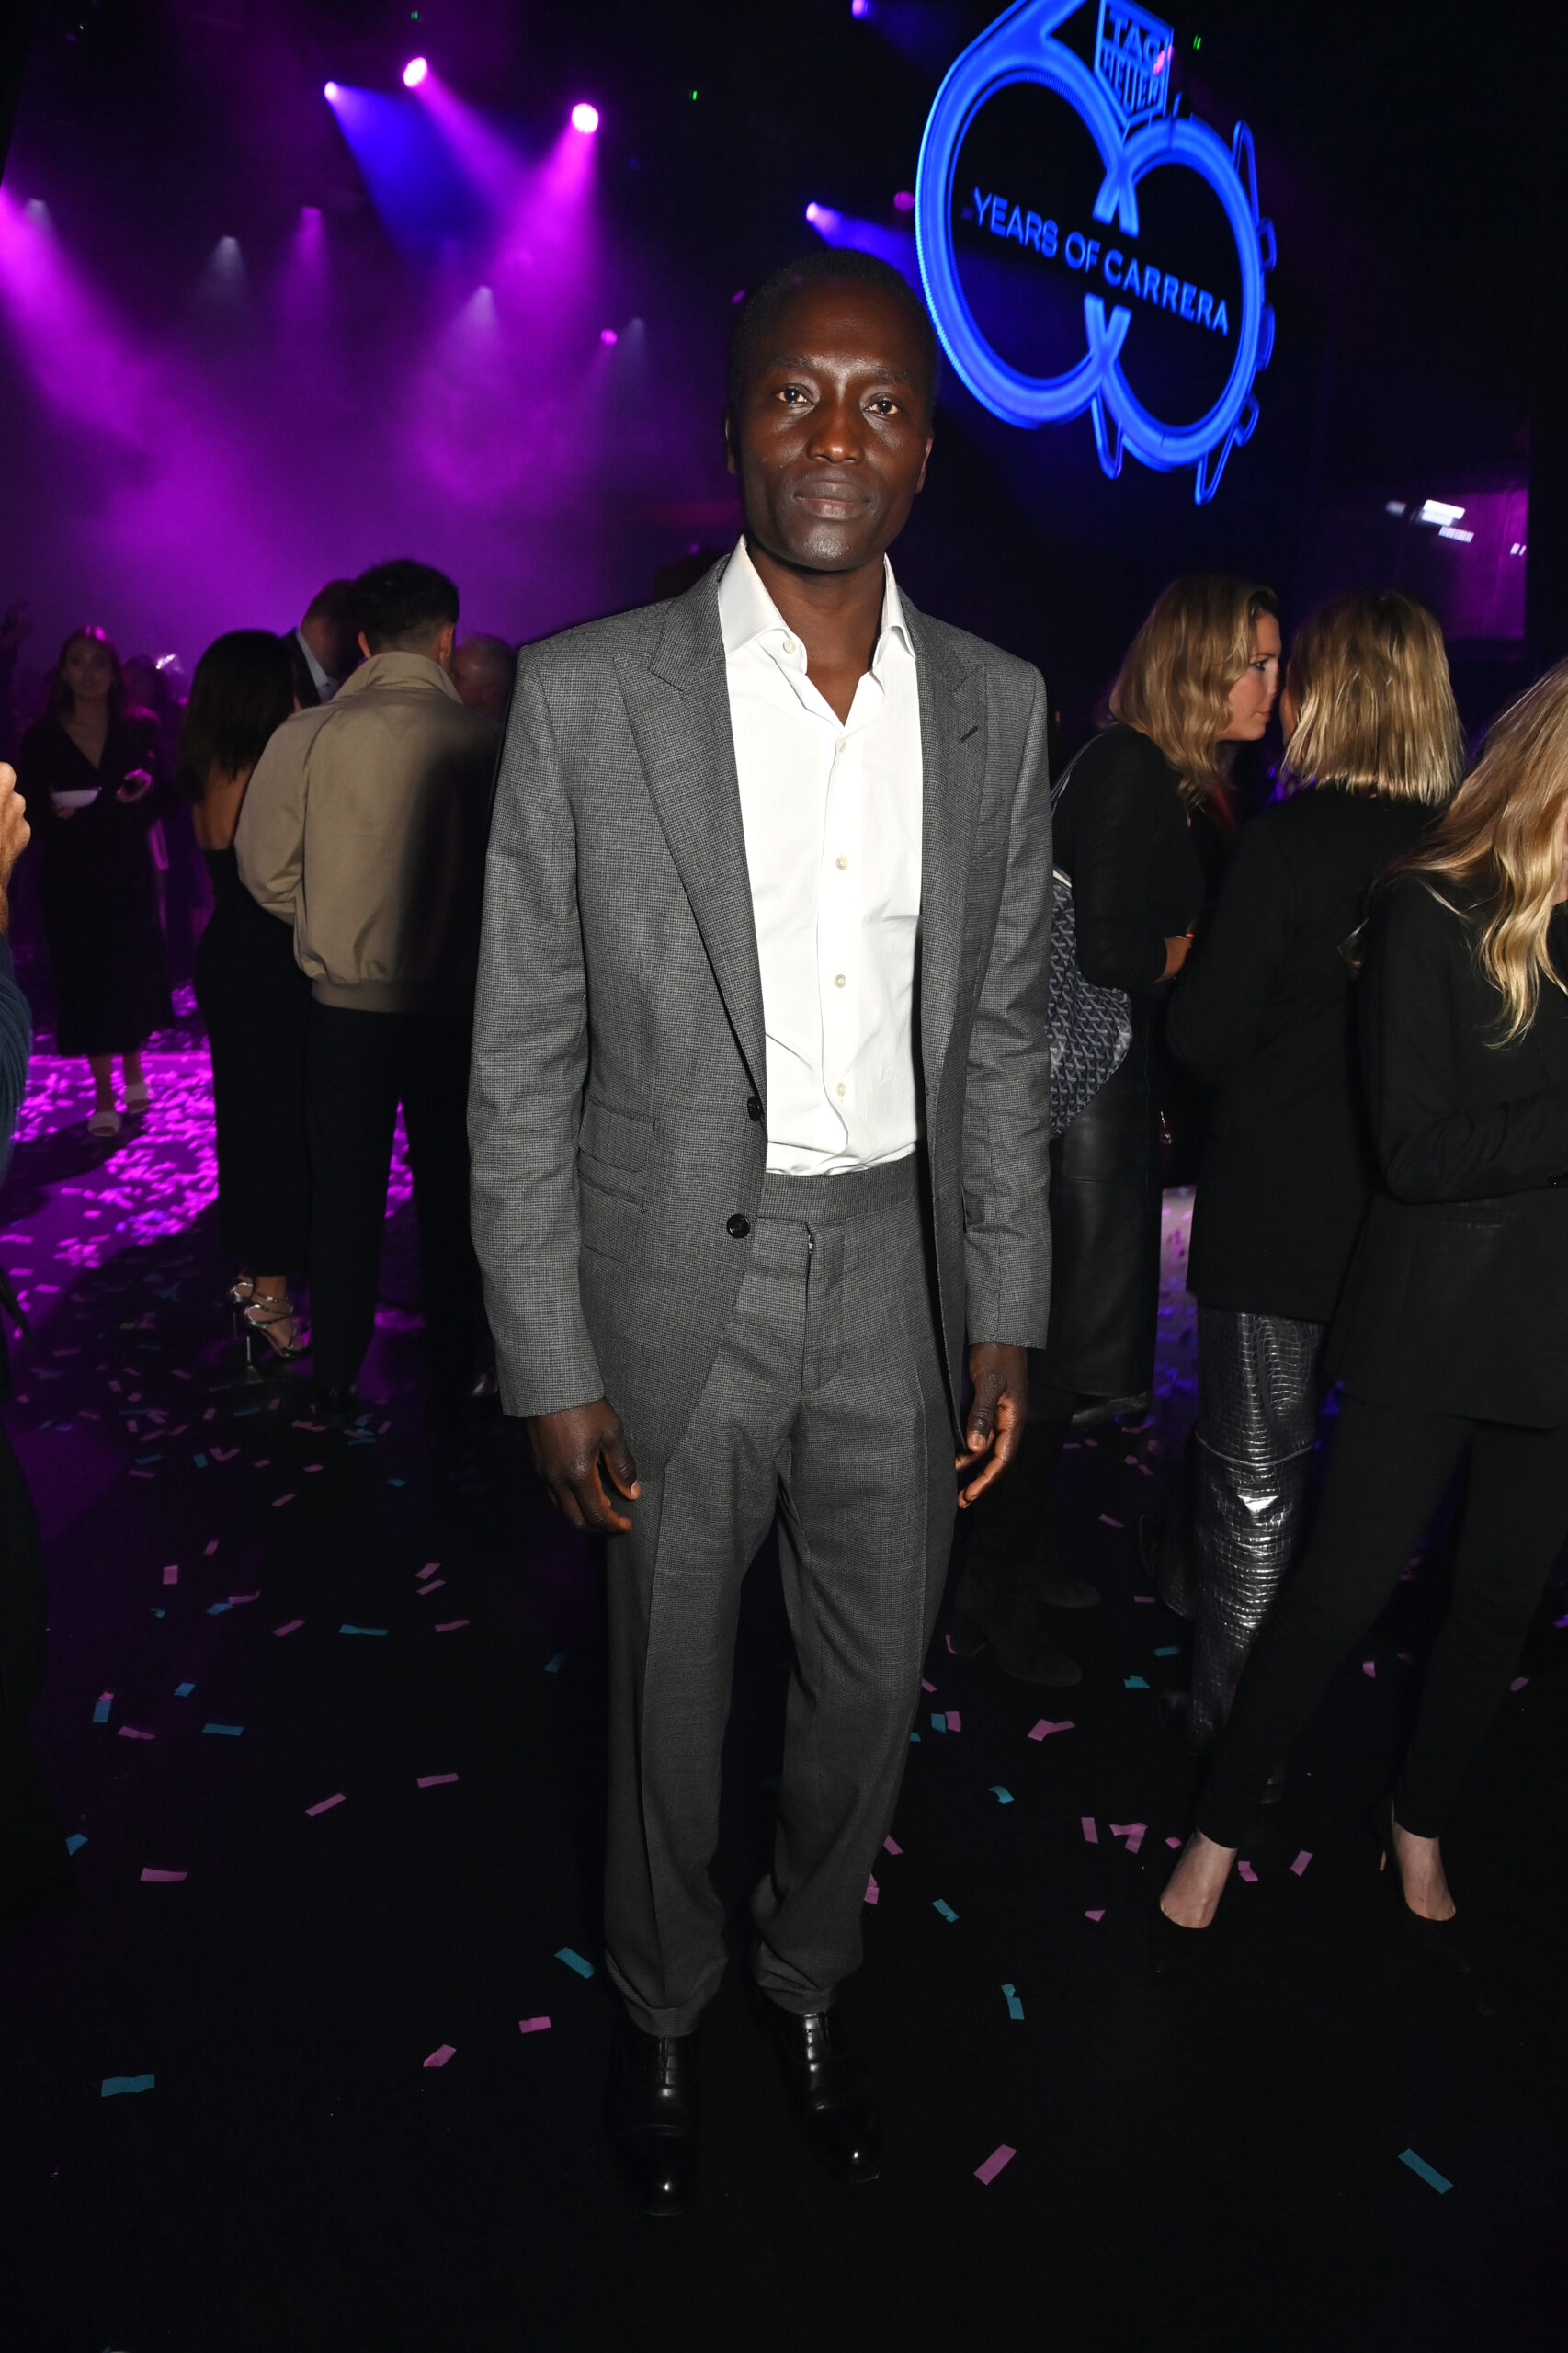 Dennis okwera at the tag heuer carrera 60th anniversary011 scaled